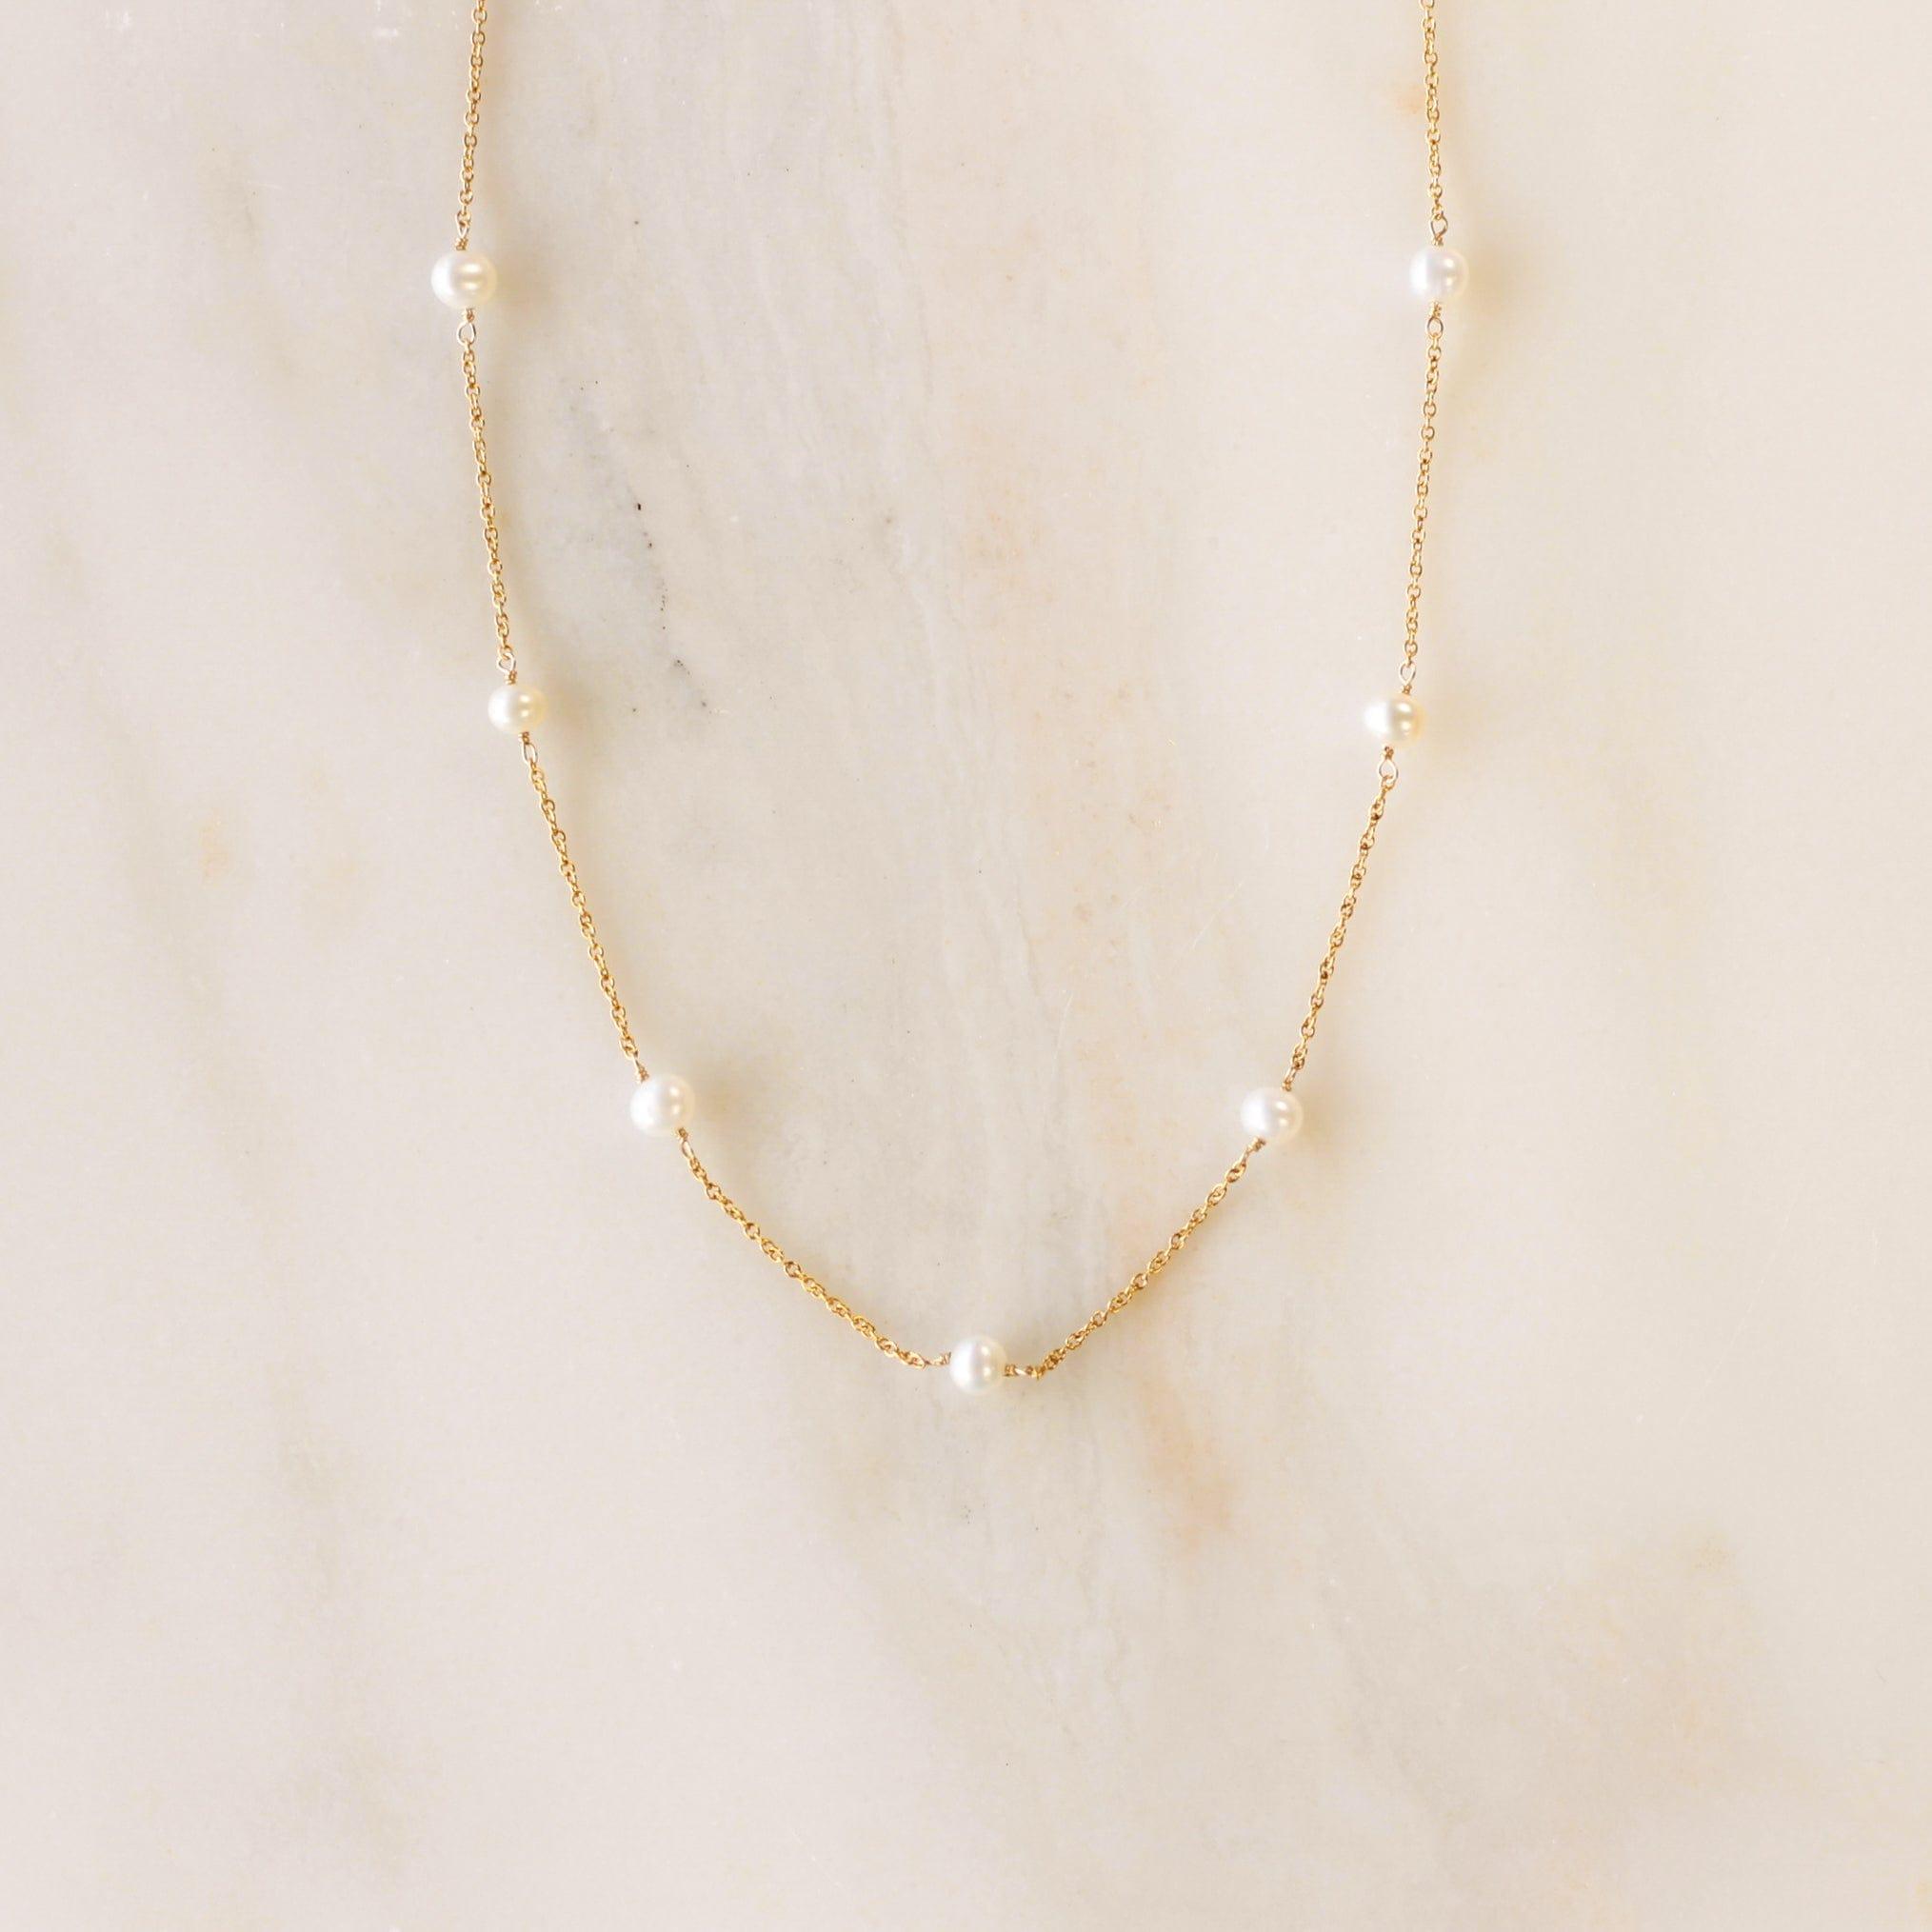 Marie Pearl Chain Necklace - Nolia Jewelry - Meaningful + Sustainably Handcrafted Jewelry